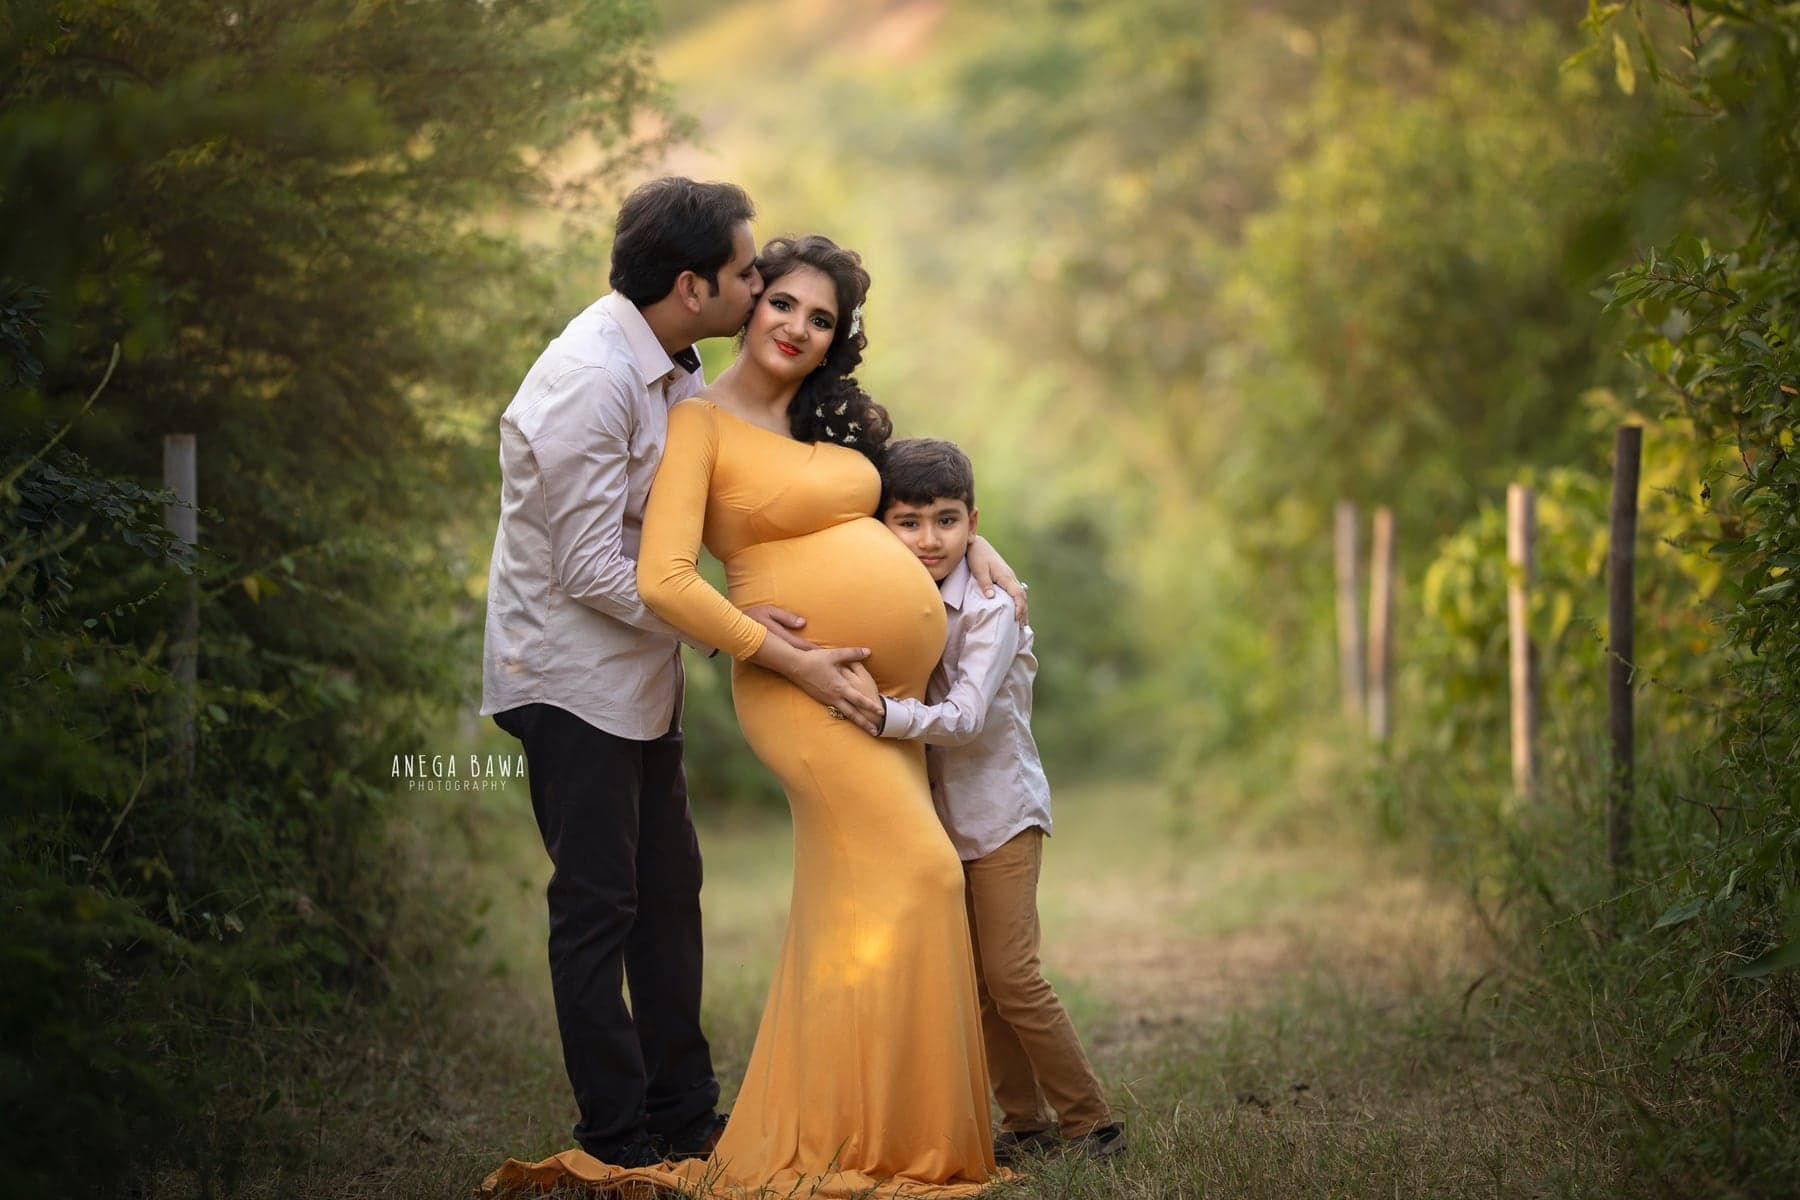 Unique Outdoors Baby Shower Photography Poses Ideas In India